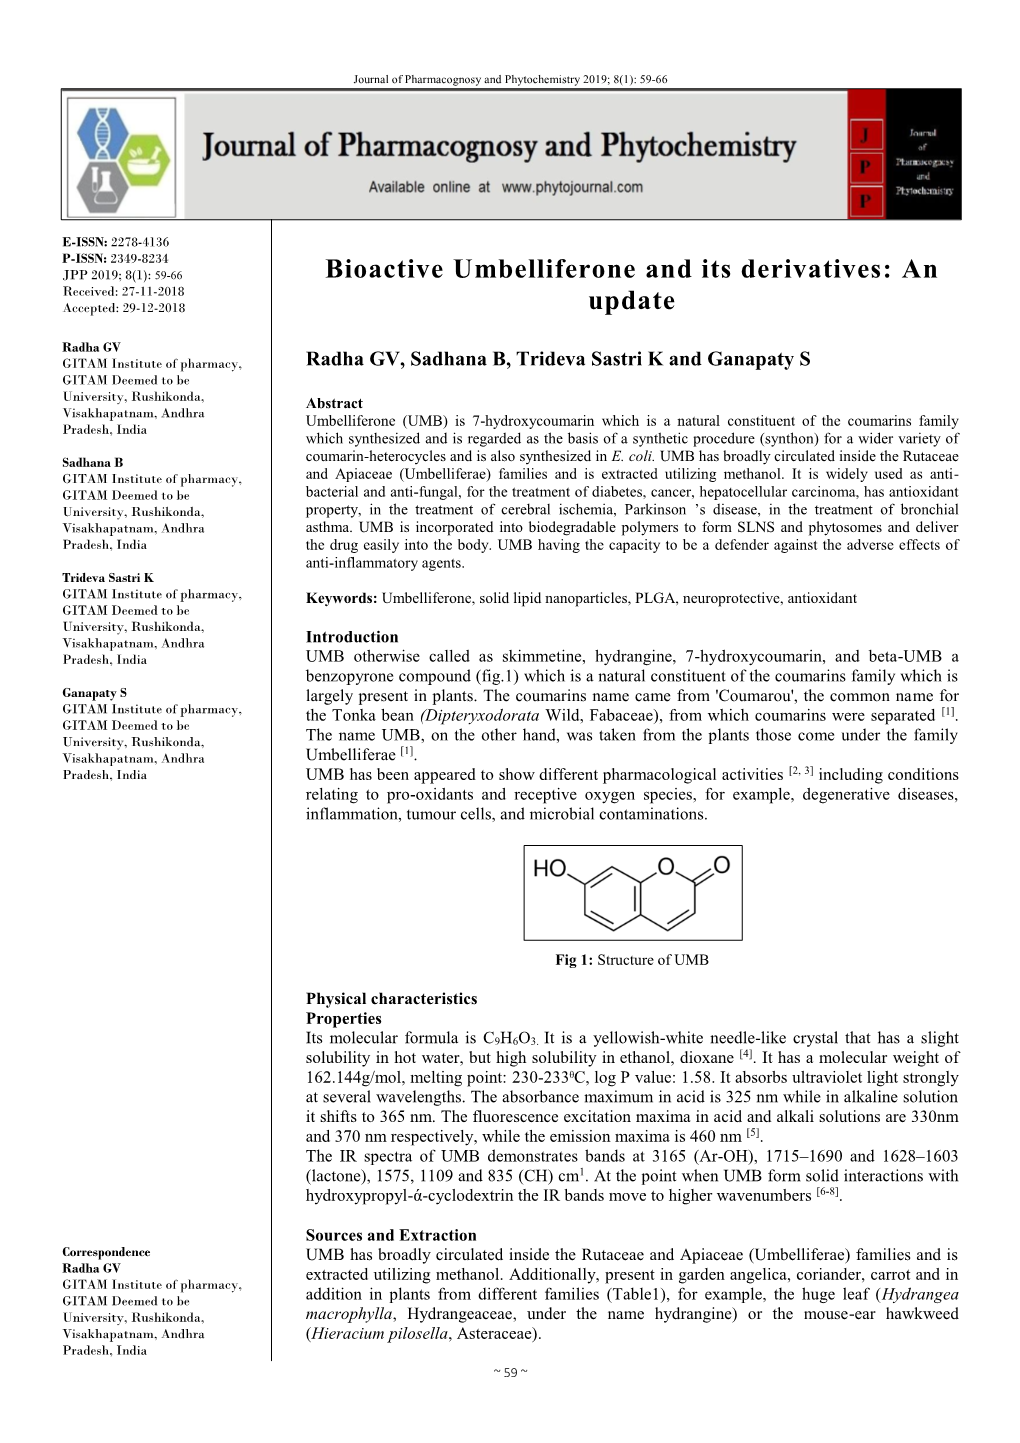 Bioactive Umbelliferone and Its Derivatives: an Update